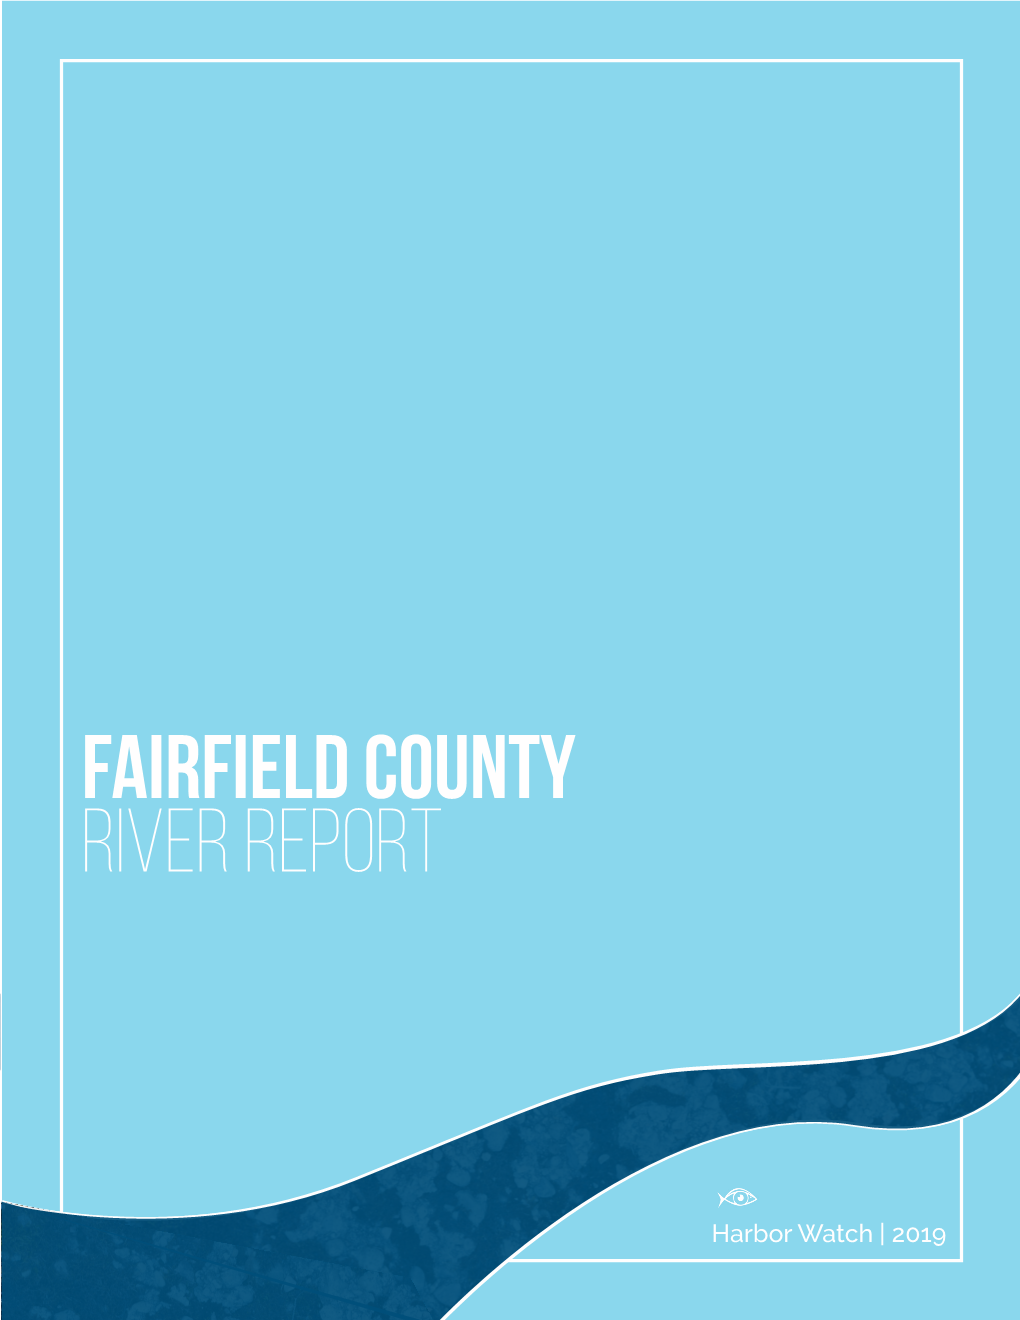 Fairfield County River Report